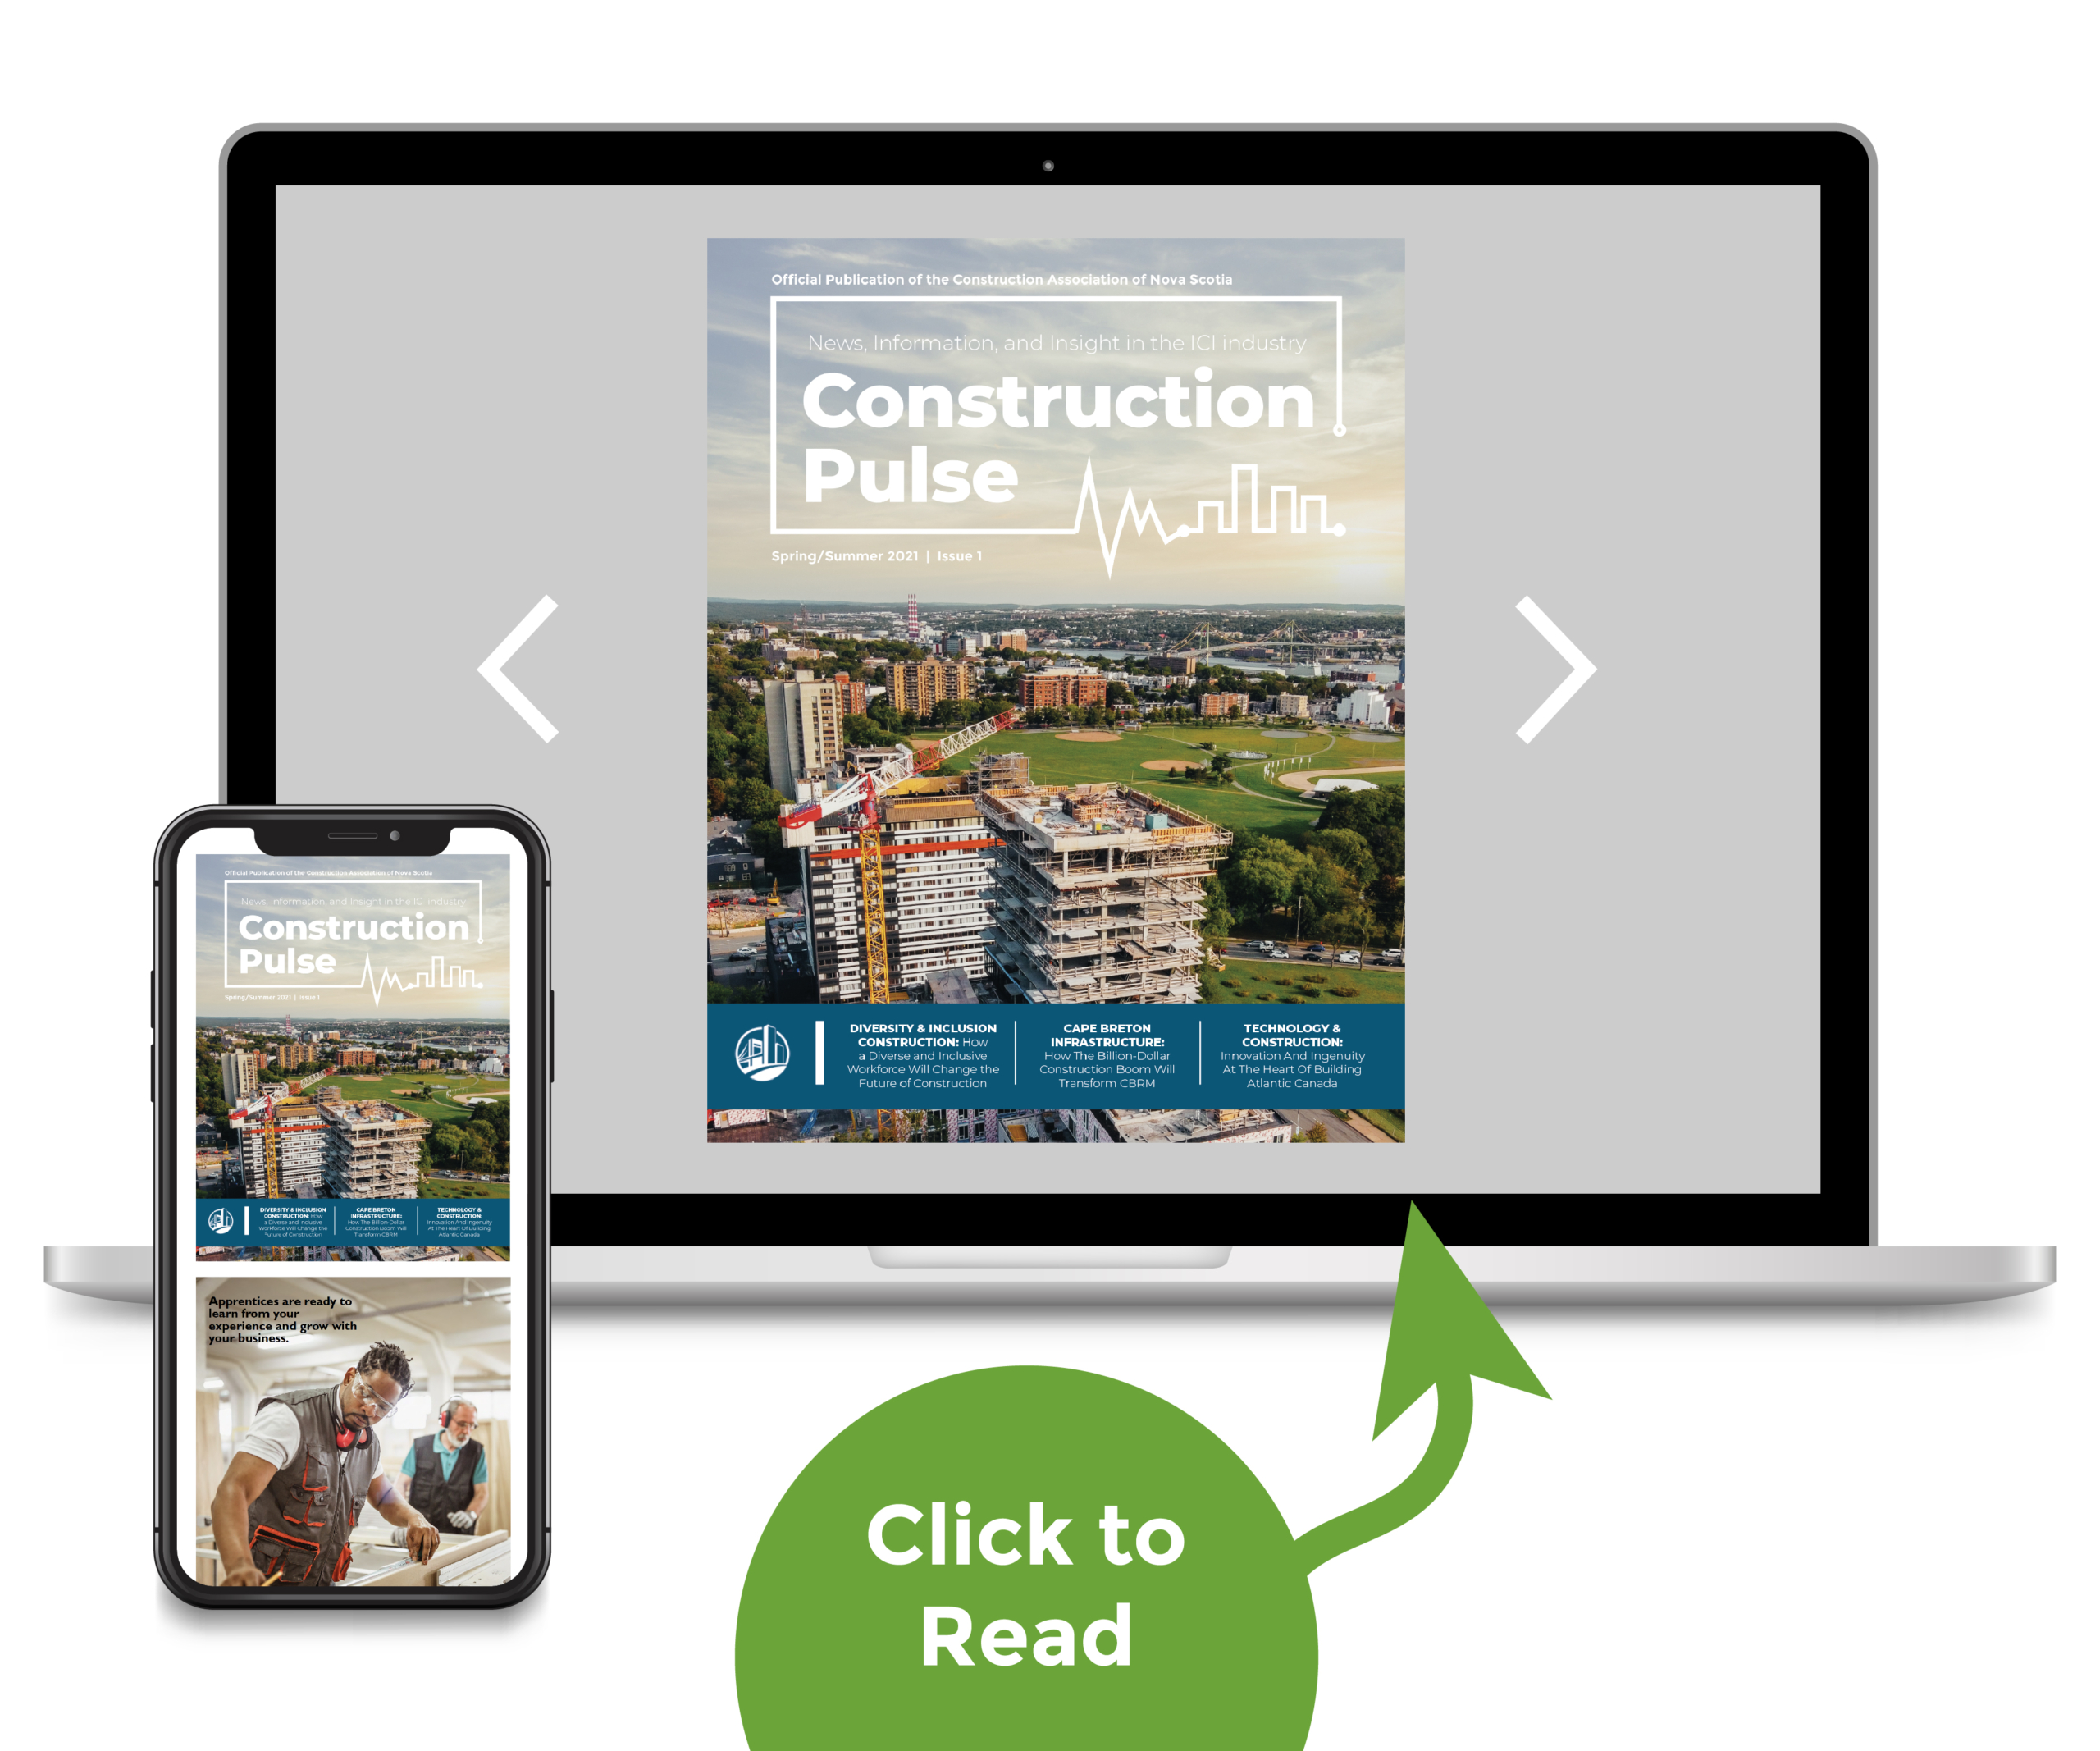 Click to read Construction Pulse Magazine - Issue One now.